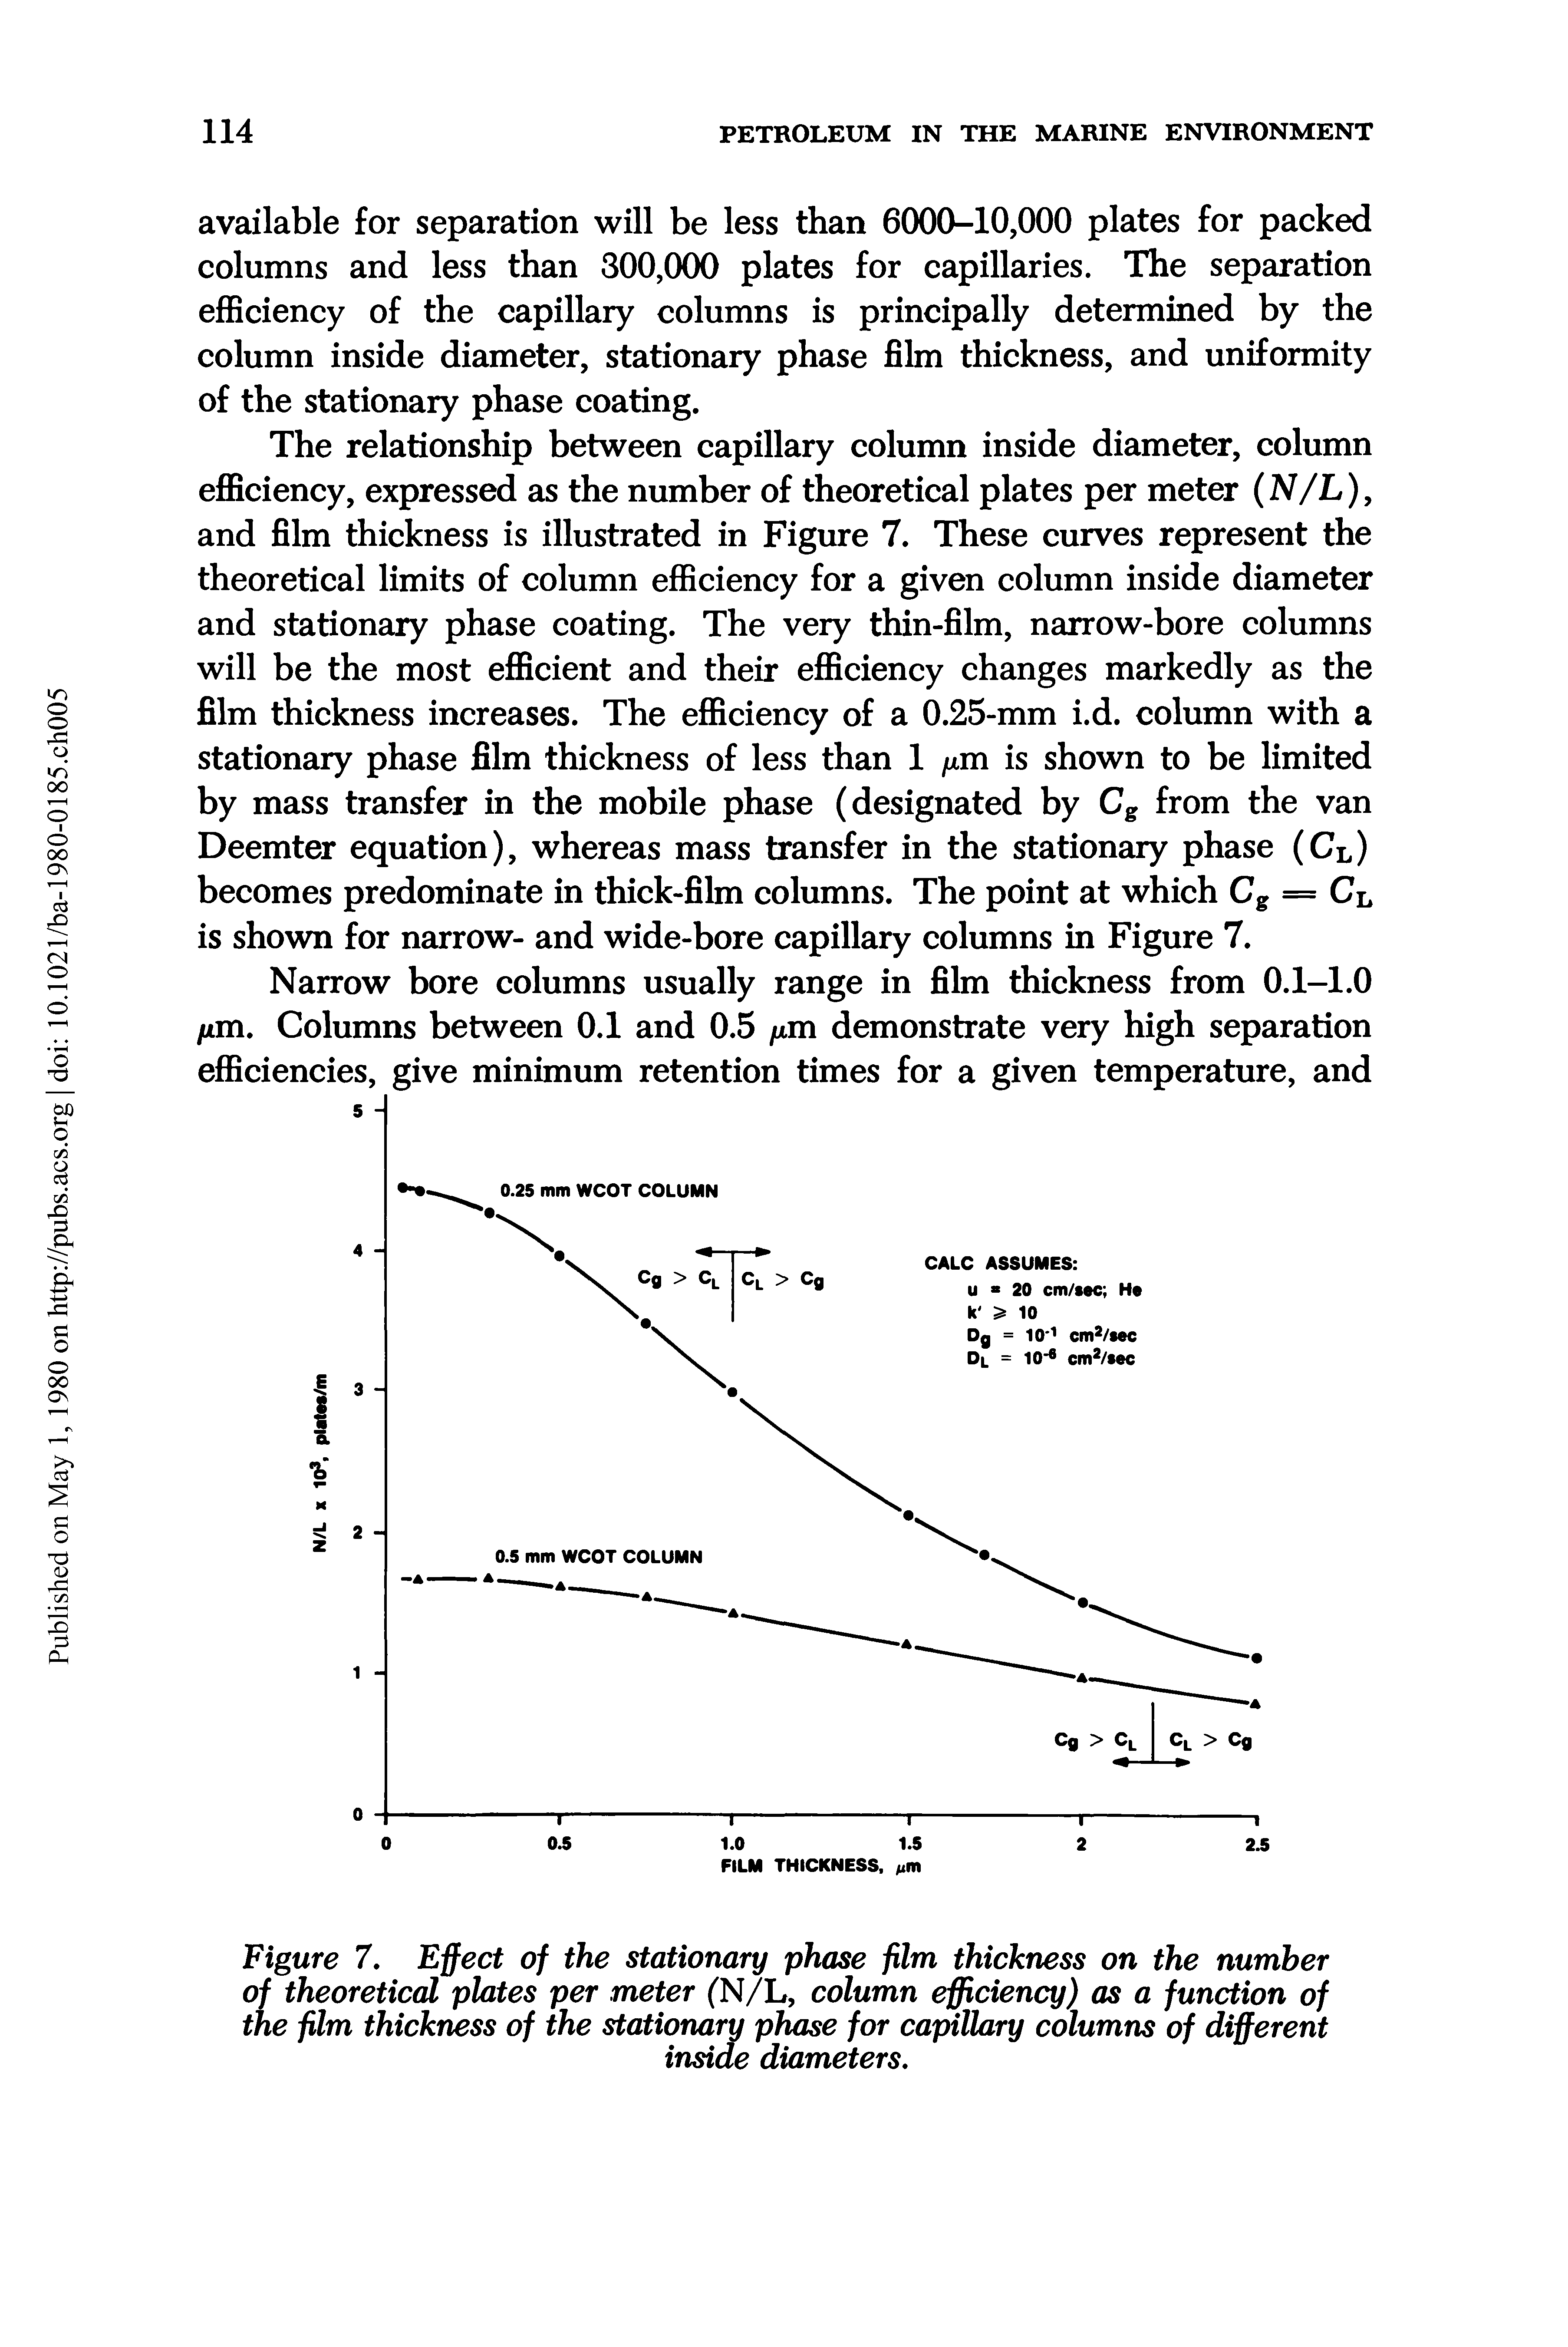 Figure 7. Effect of the stationary phase film thickness on the number of theoretical plates per meter (N/L, column efficiency) as a function of the film thickness of the stationary phase for capillary columns of different...